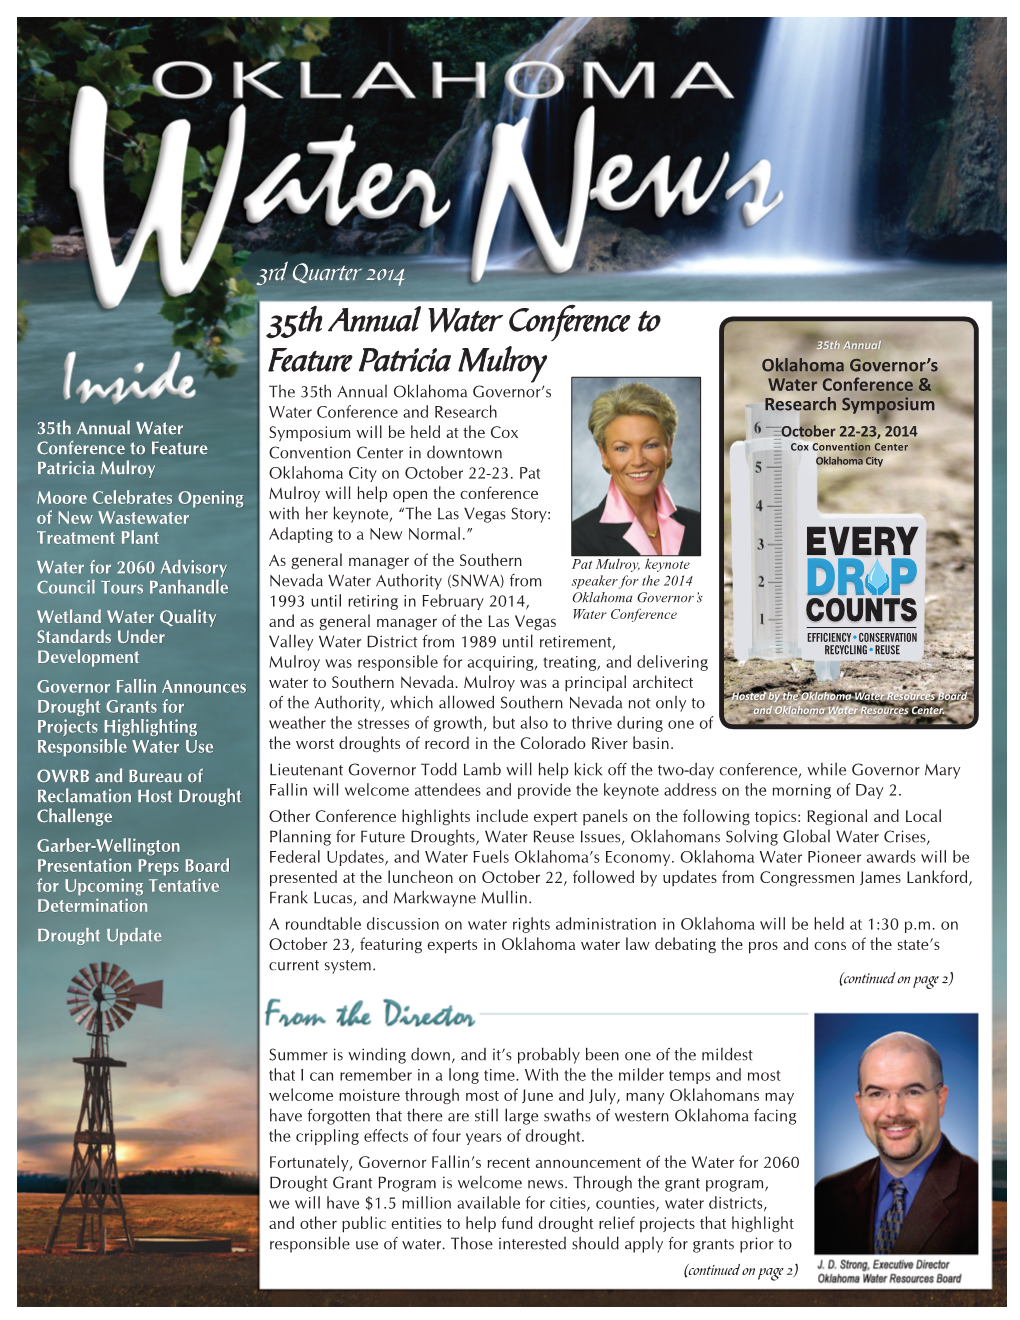 35Th Annual Water Conference to Feature Patricia Mulroy